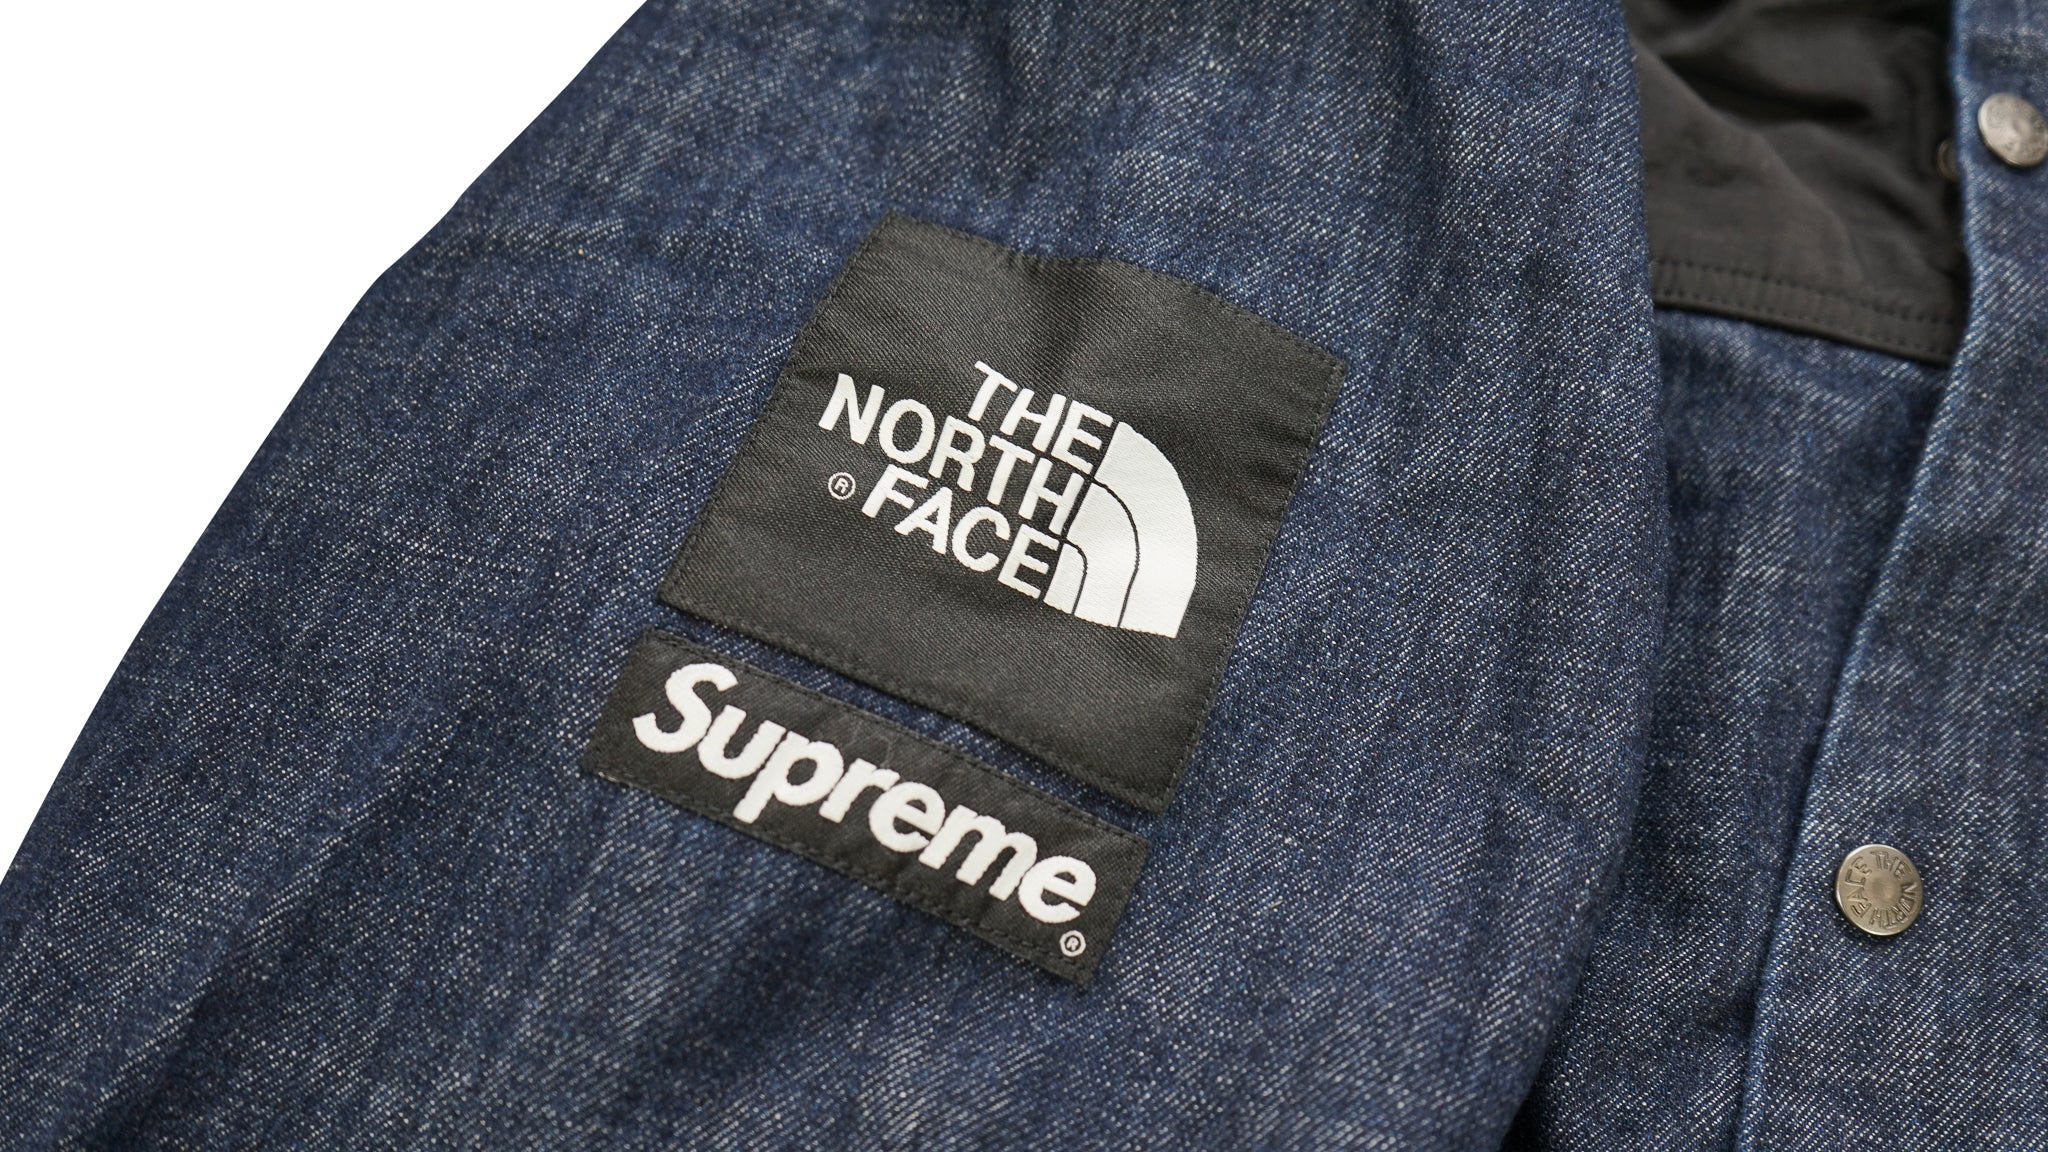 SS15 Supreme x The North Face 